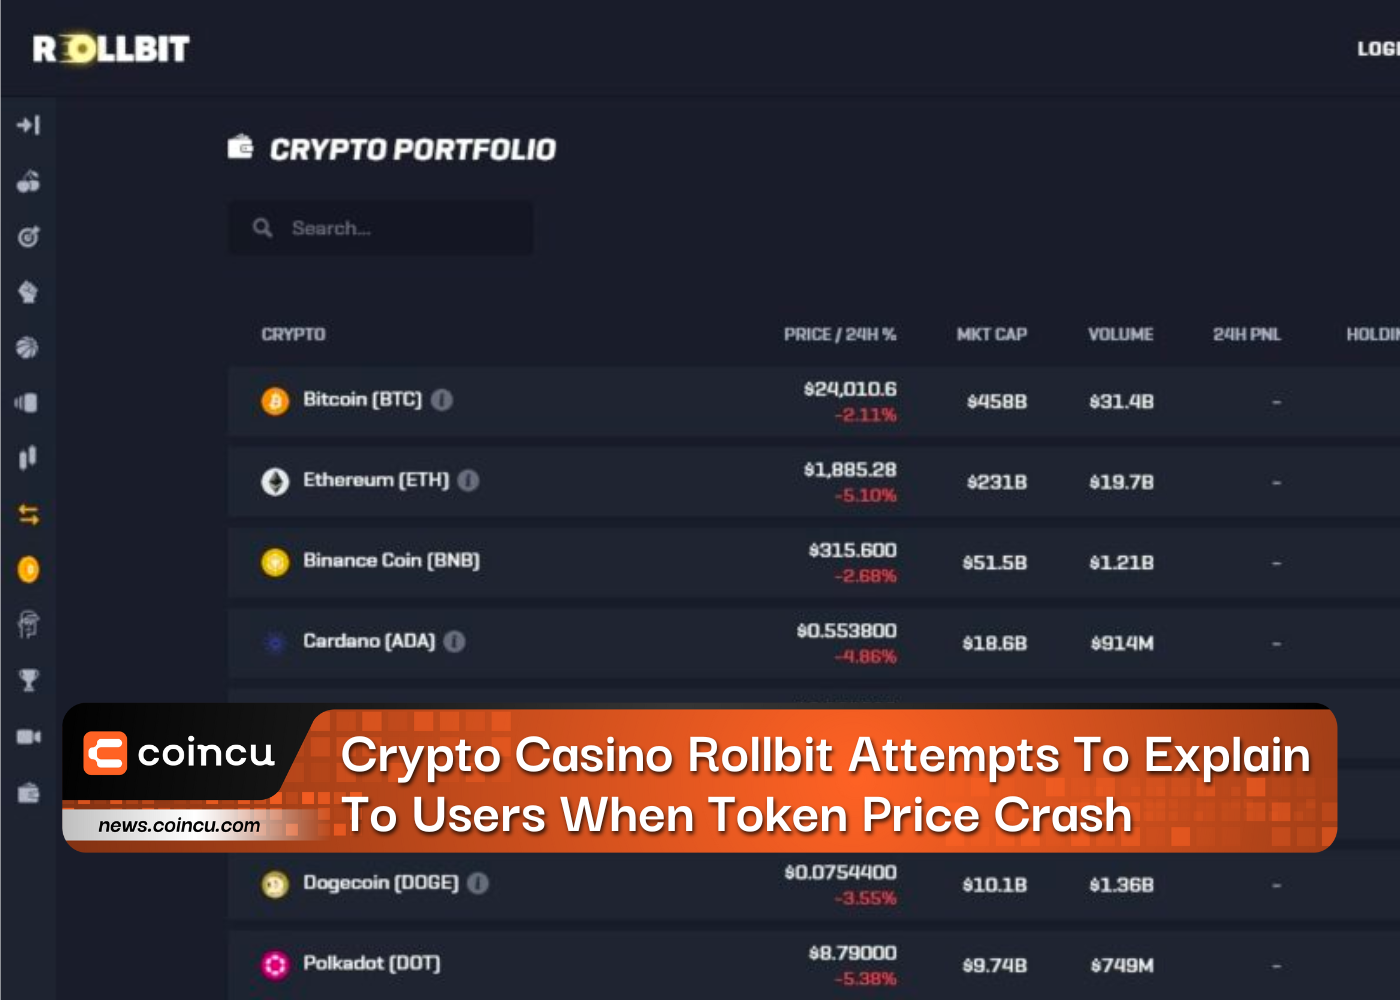 Crypto Casino Rollbit Attempts To Explain To Users When Token Price Crash